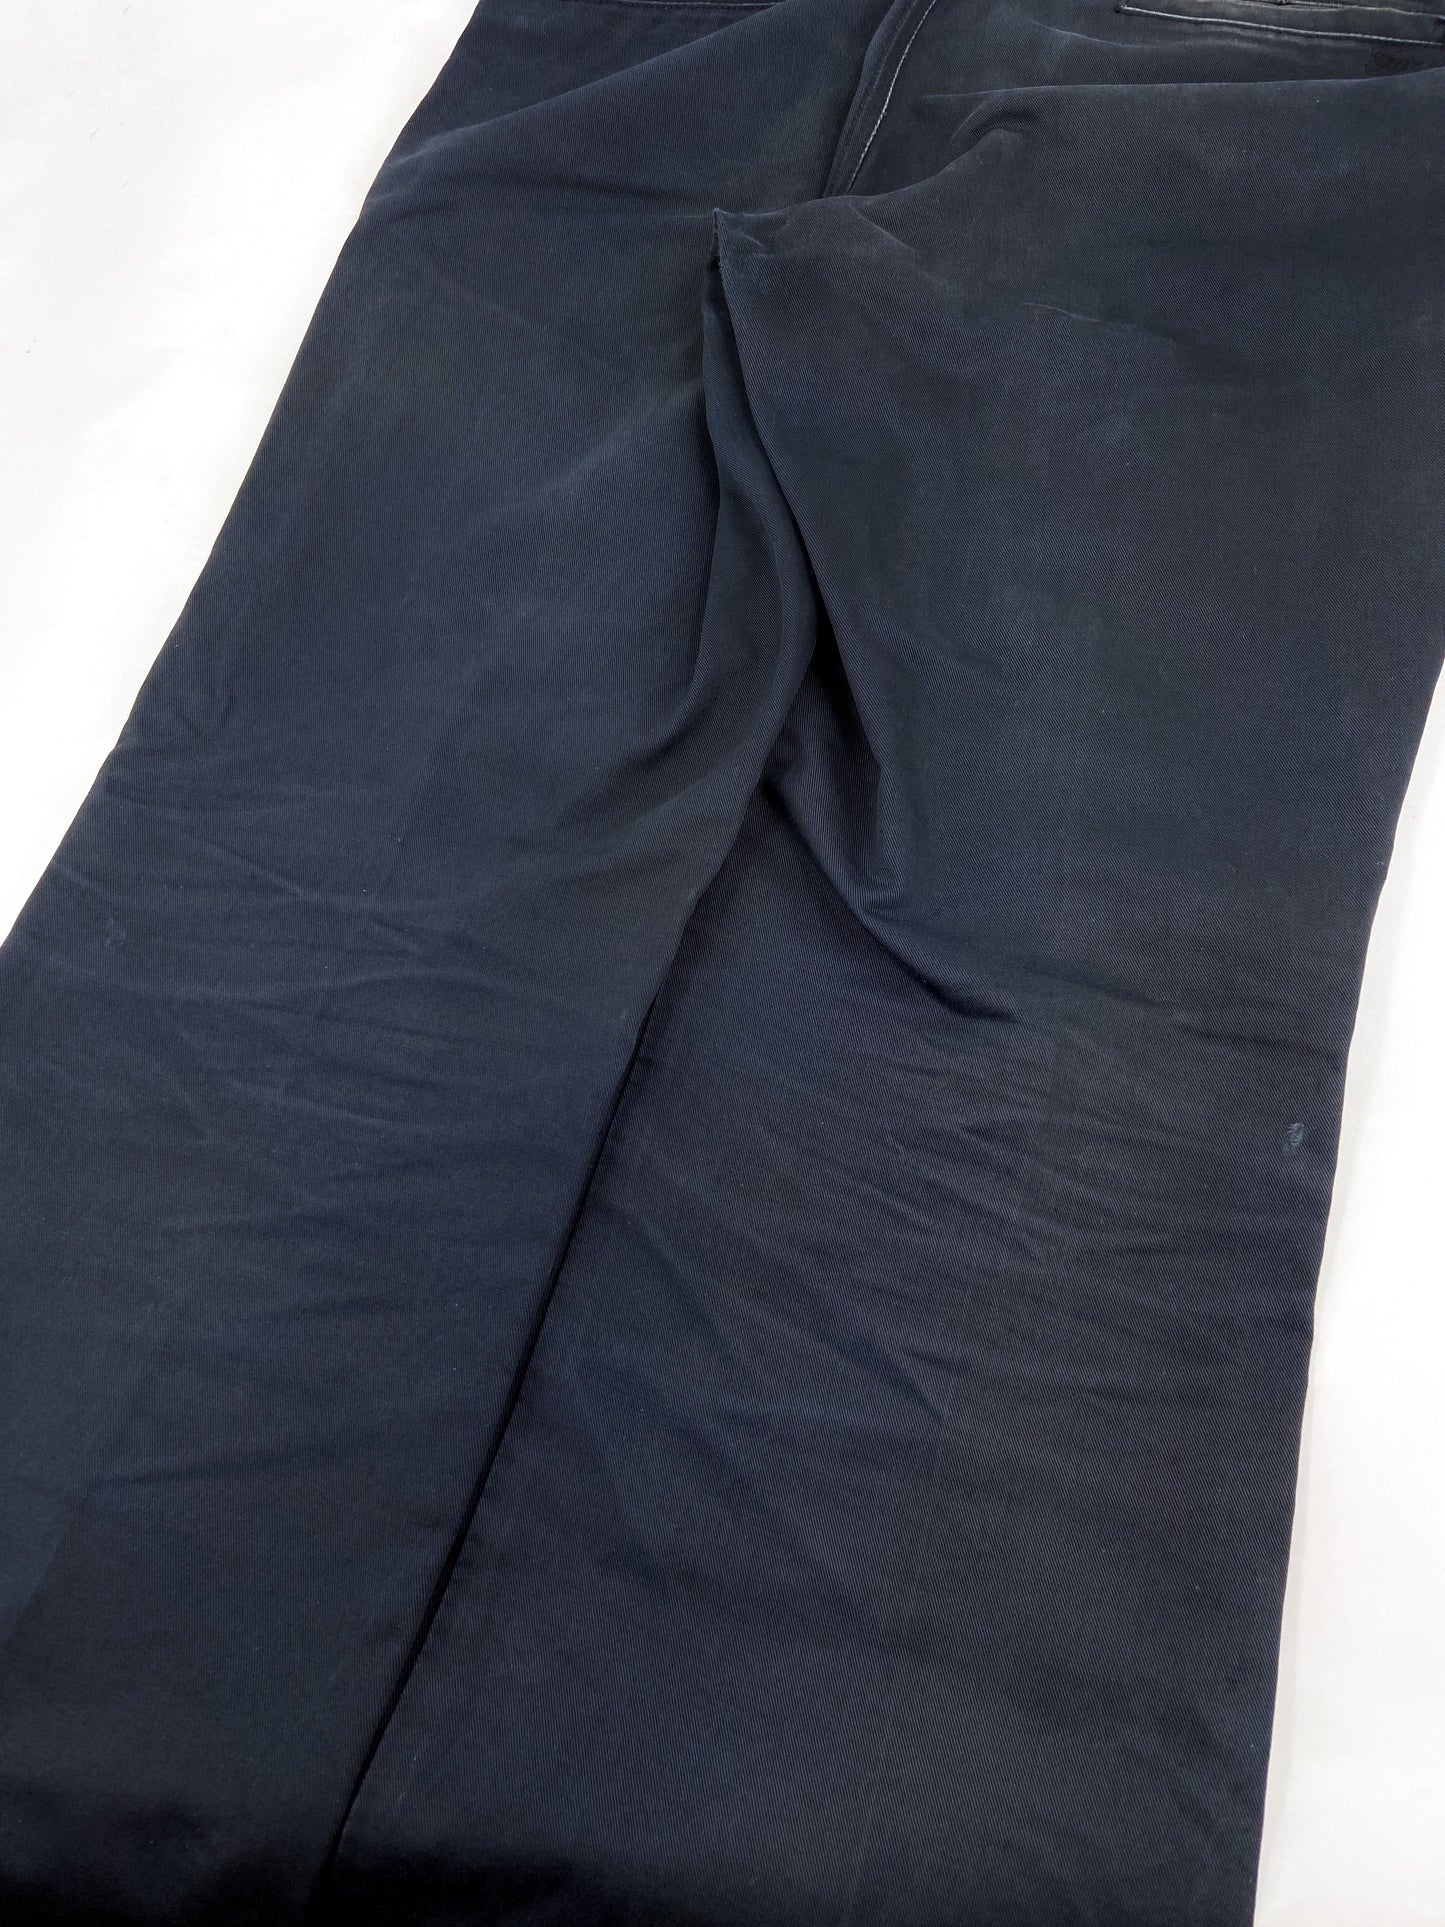 Gucci Spring 2002 Tom Ford Mens Navy Cargo Jeans Pants